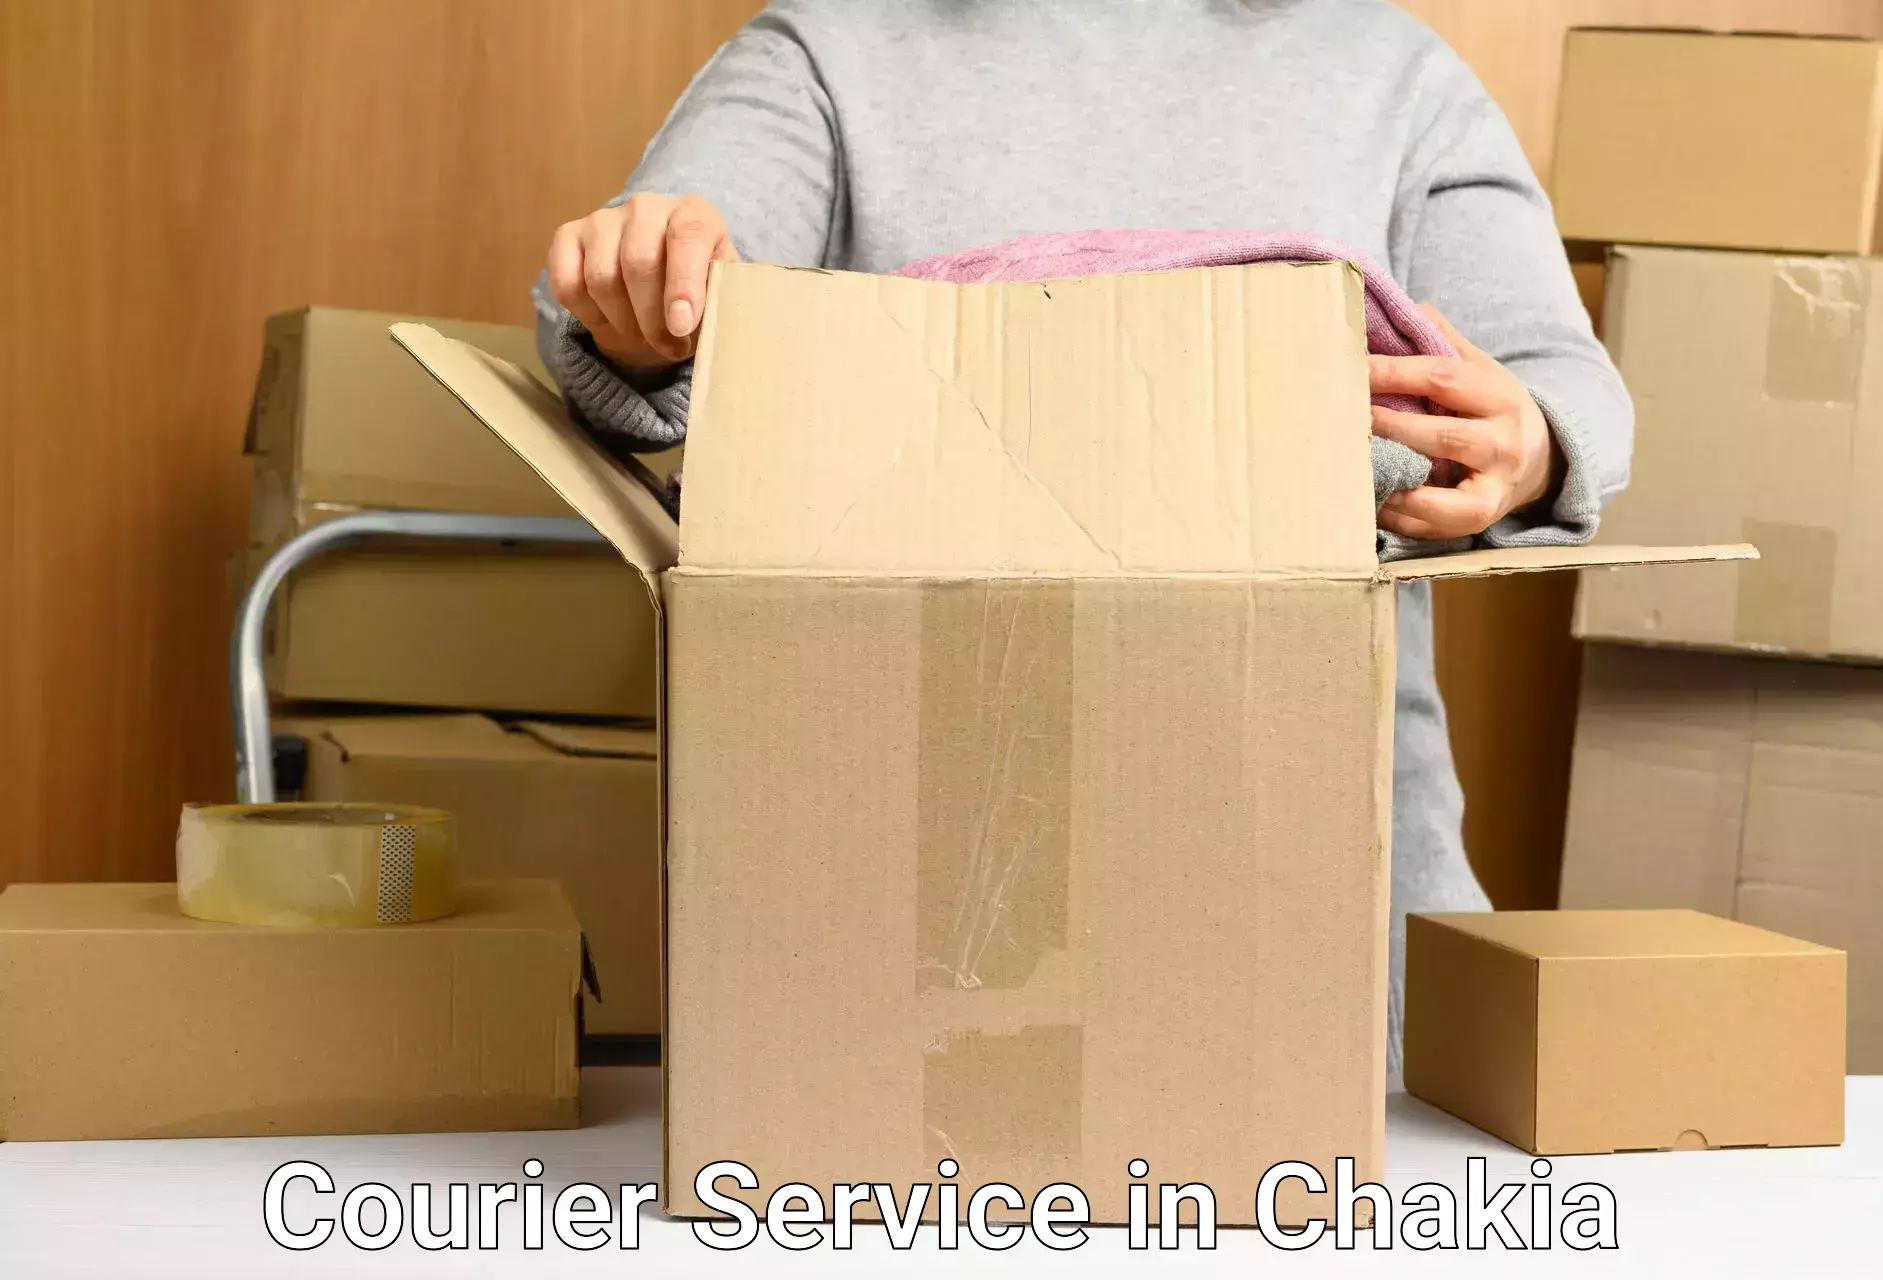 Next-generation courier services in Chakia